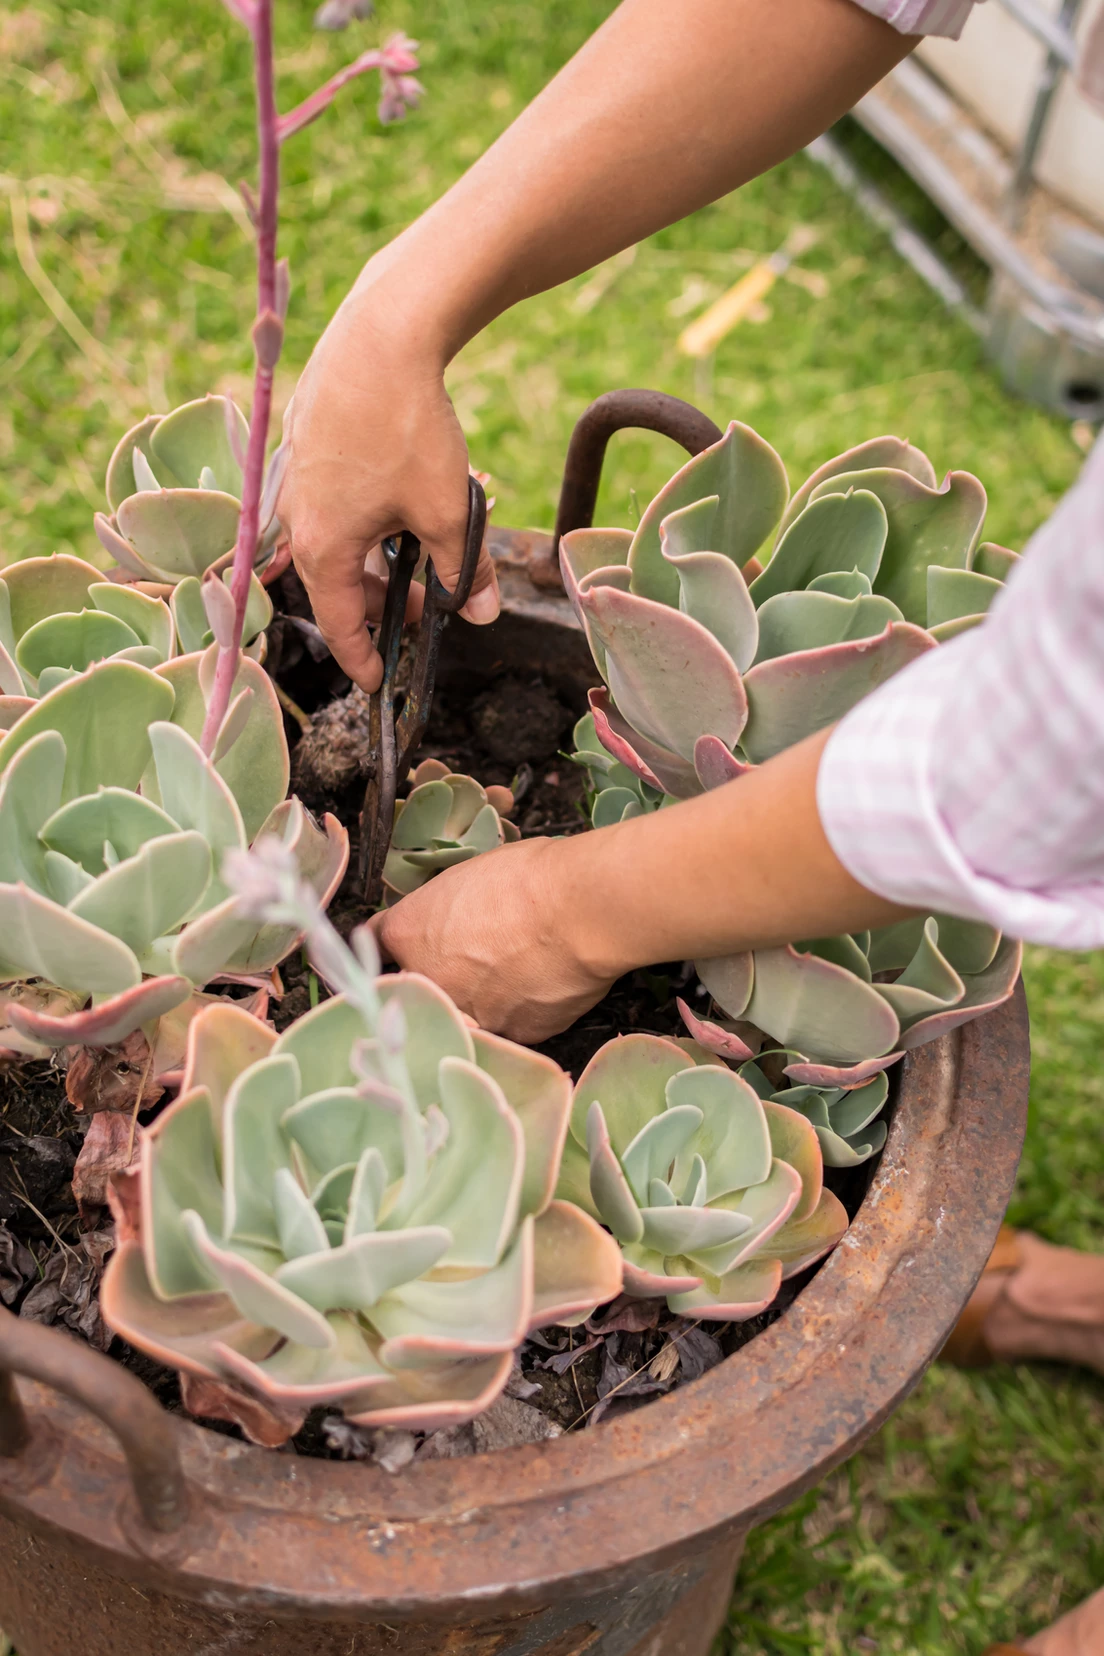 Mindful gardening: A Succulent Journey